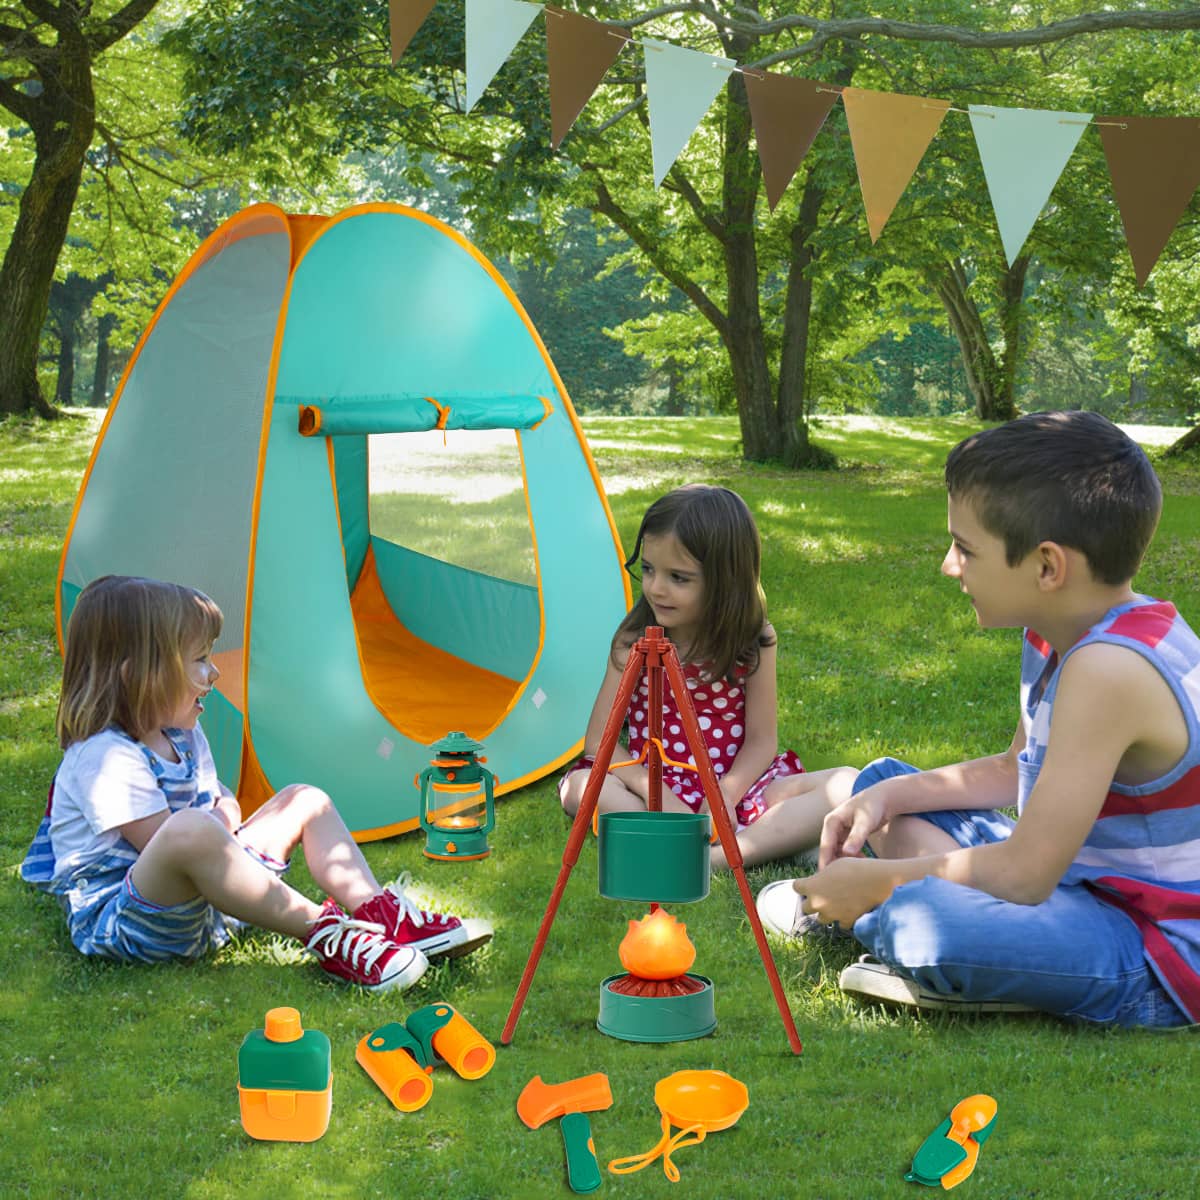 Camping Gear for Kids - Outdoor Play Set with Tent | Meland